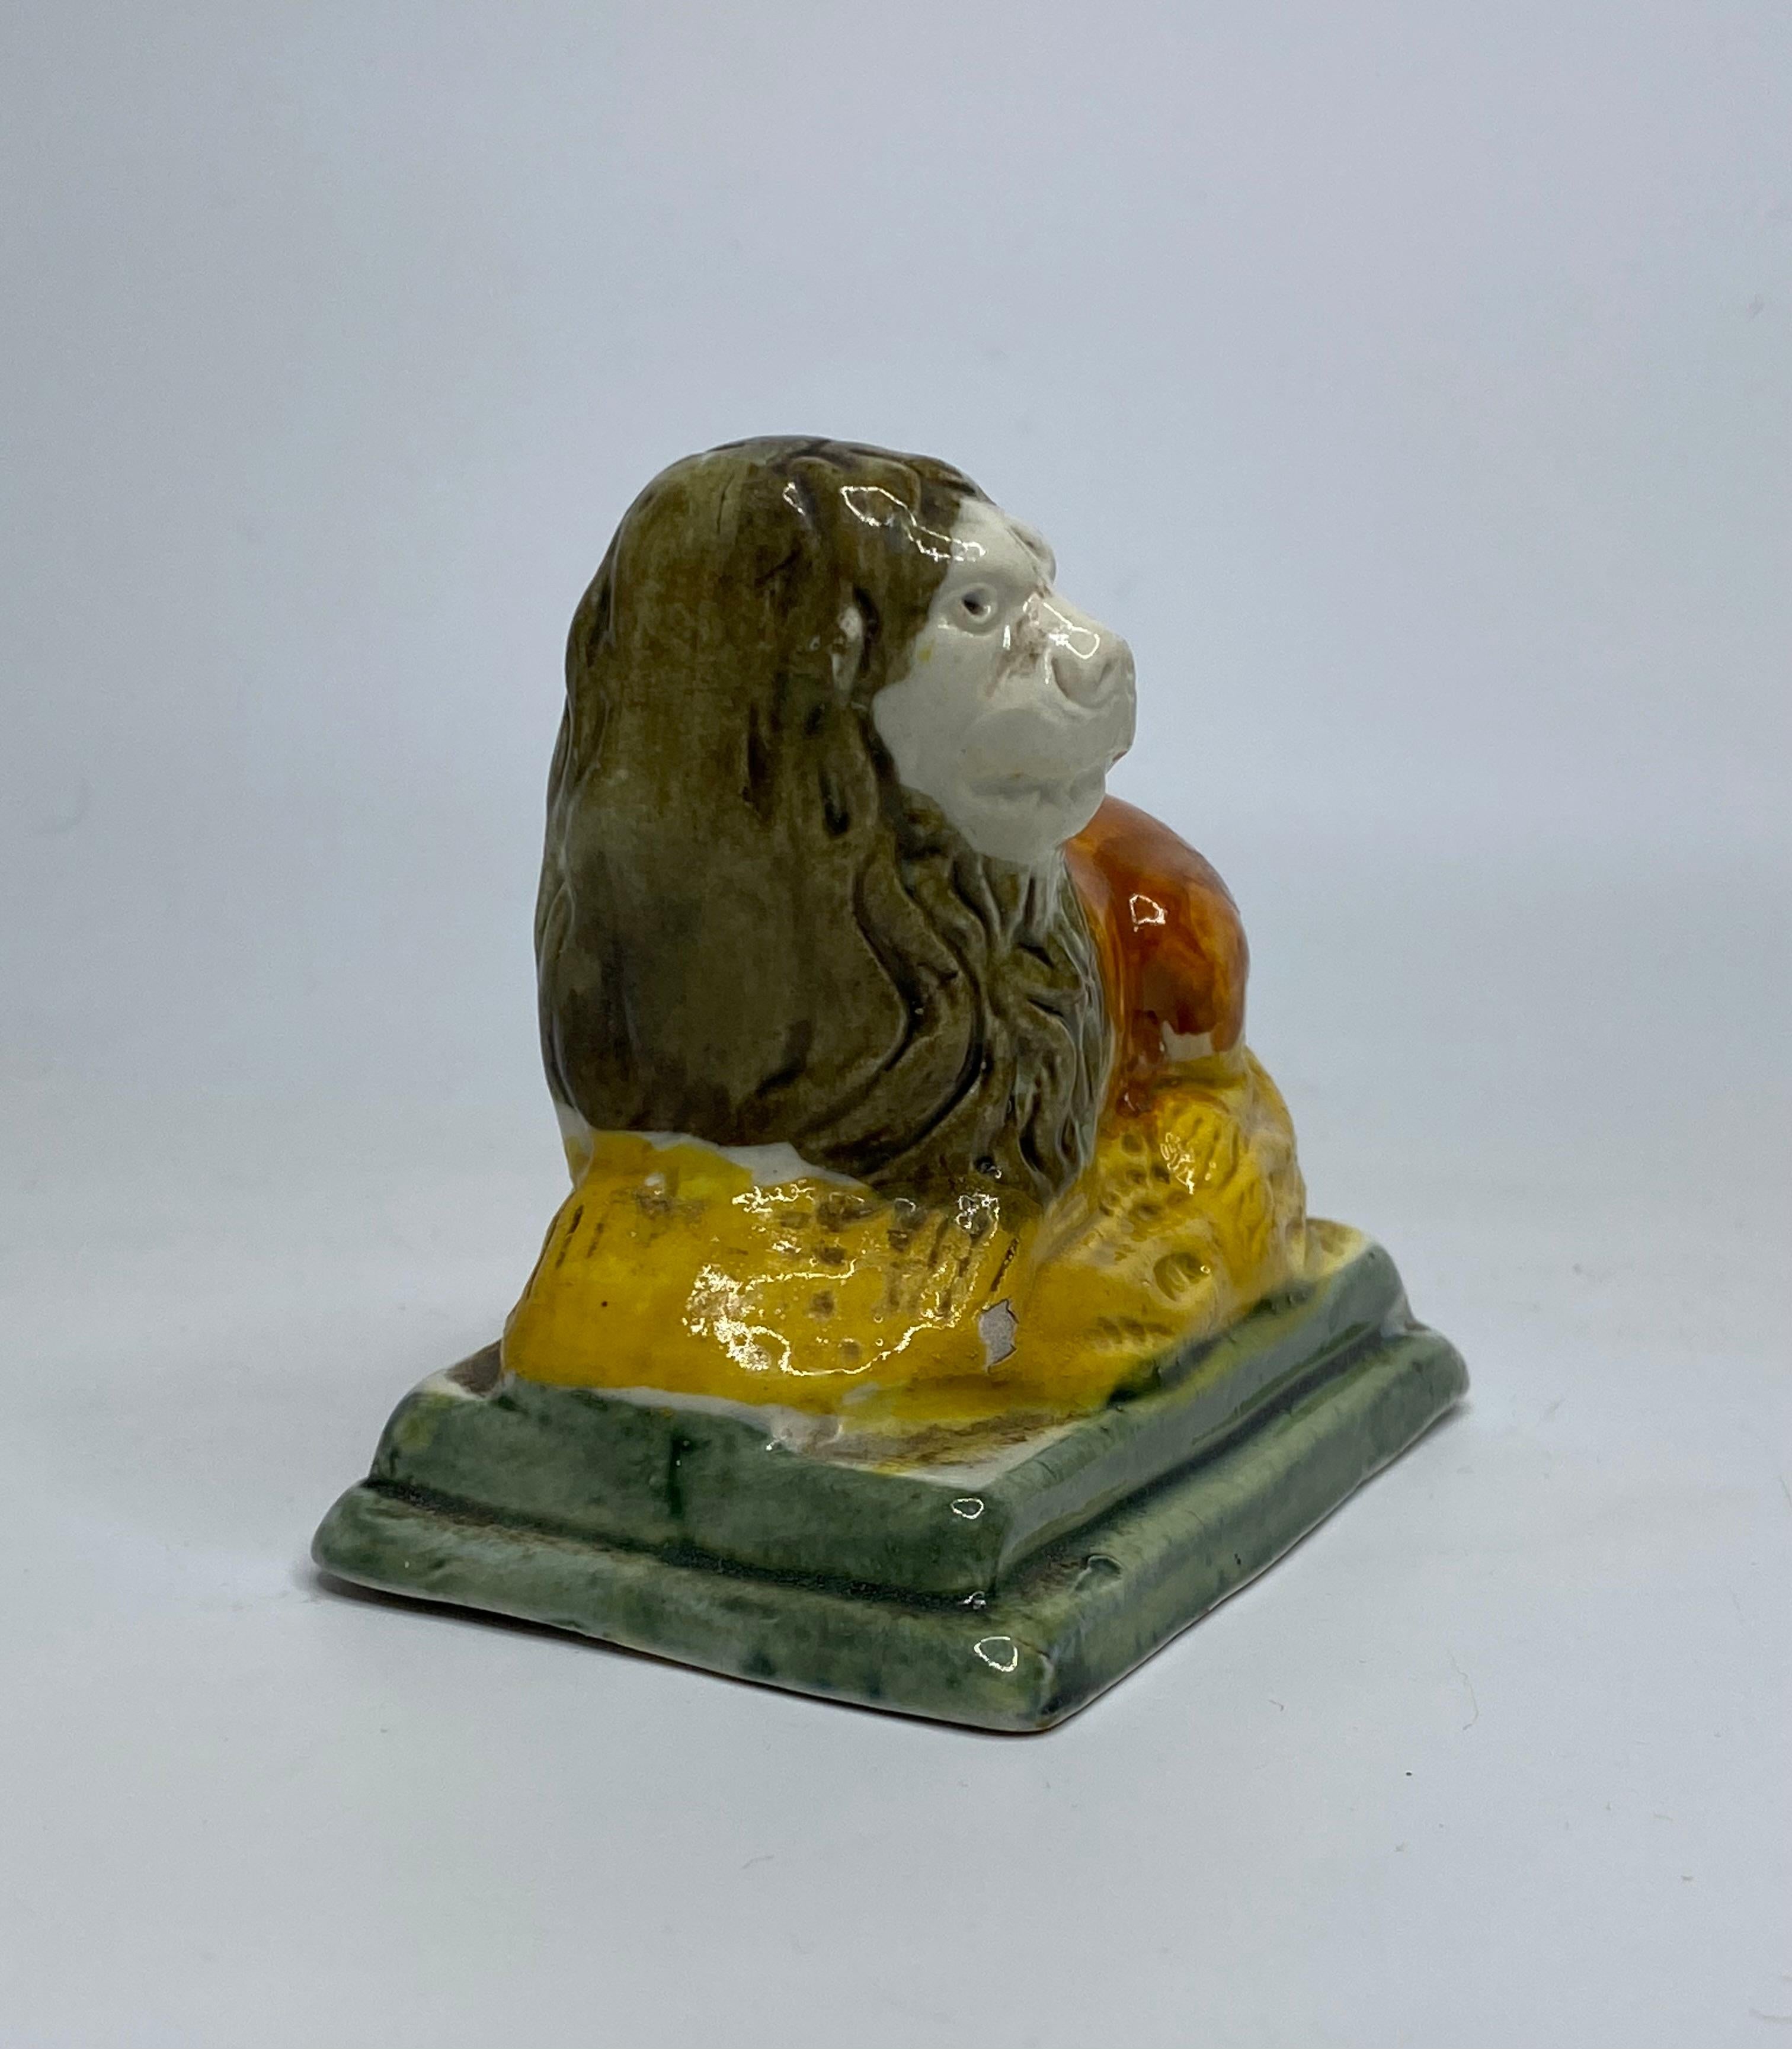 Staffordshire pottery figure of a lion, c. 1790. The recumbent lion, covered in Pratt type glazes, laid upon a yellow mound base. Set upon a green glazed stepped pedestal base.
Having a hollow base.
Length – 9 cm, 3 1/2”.
Height – 8 cm, 3